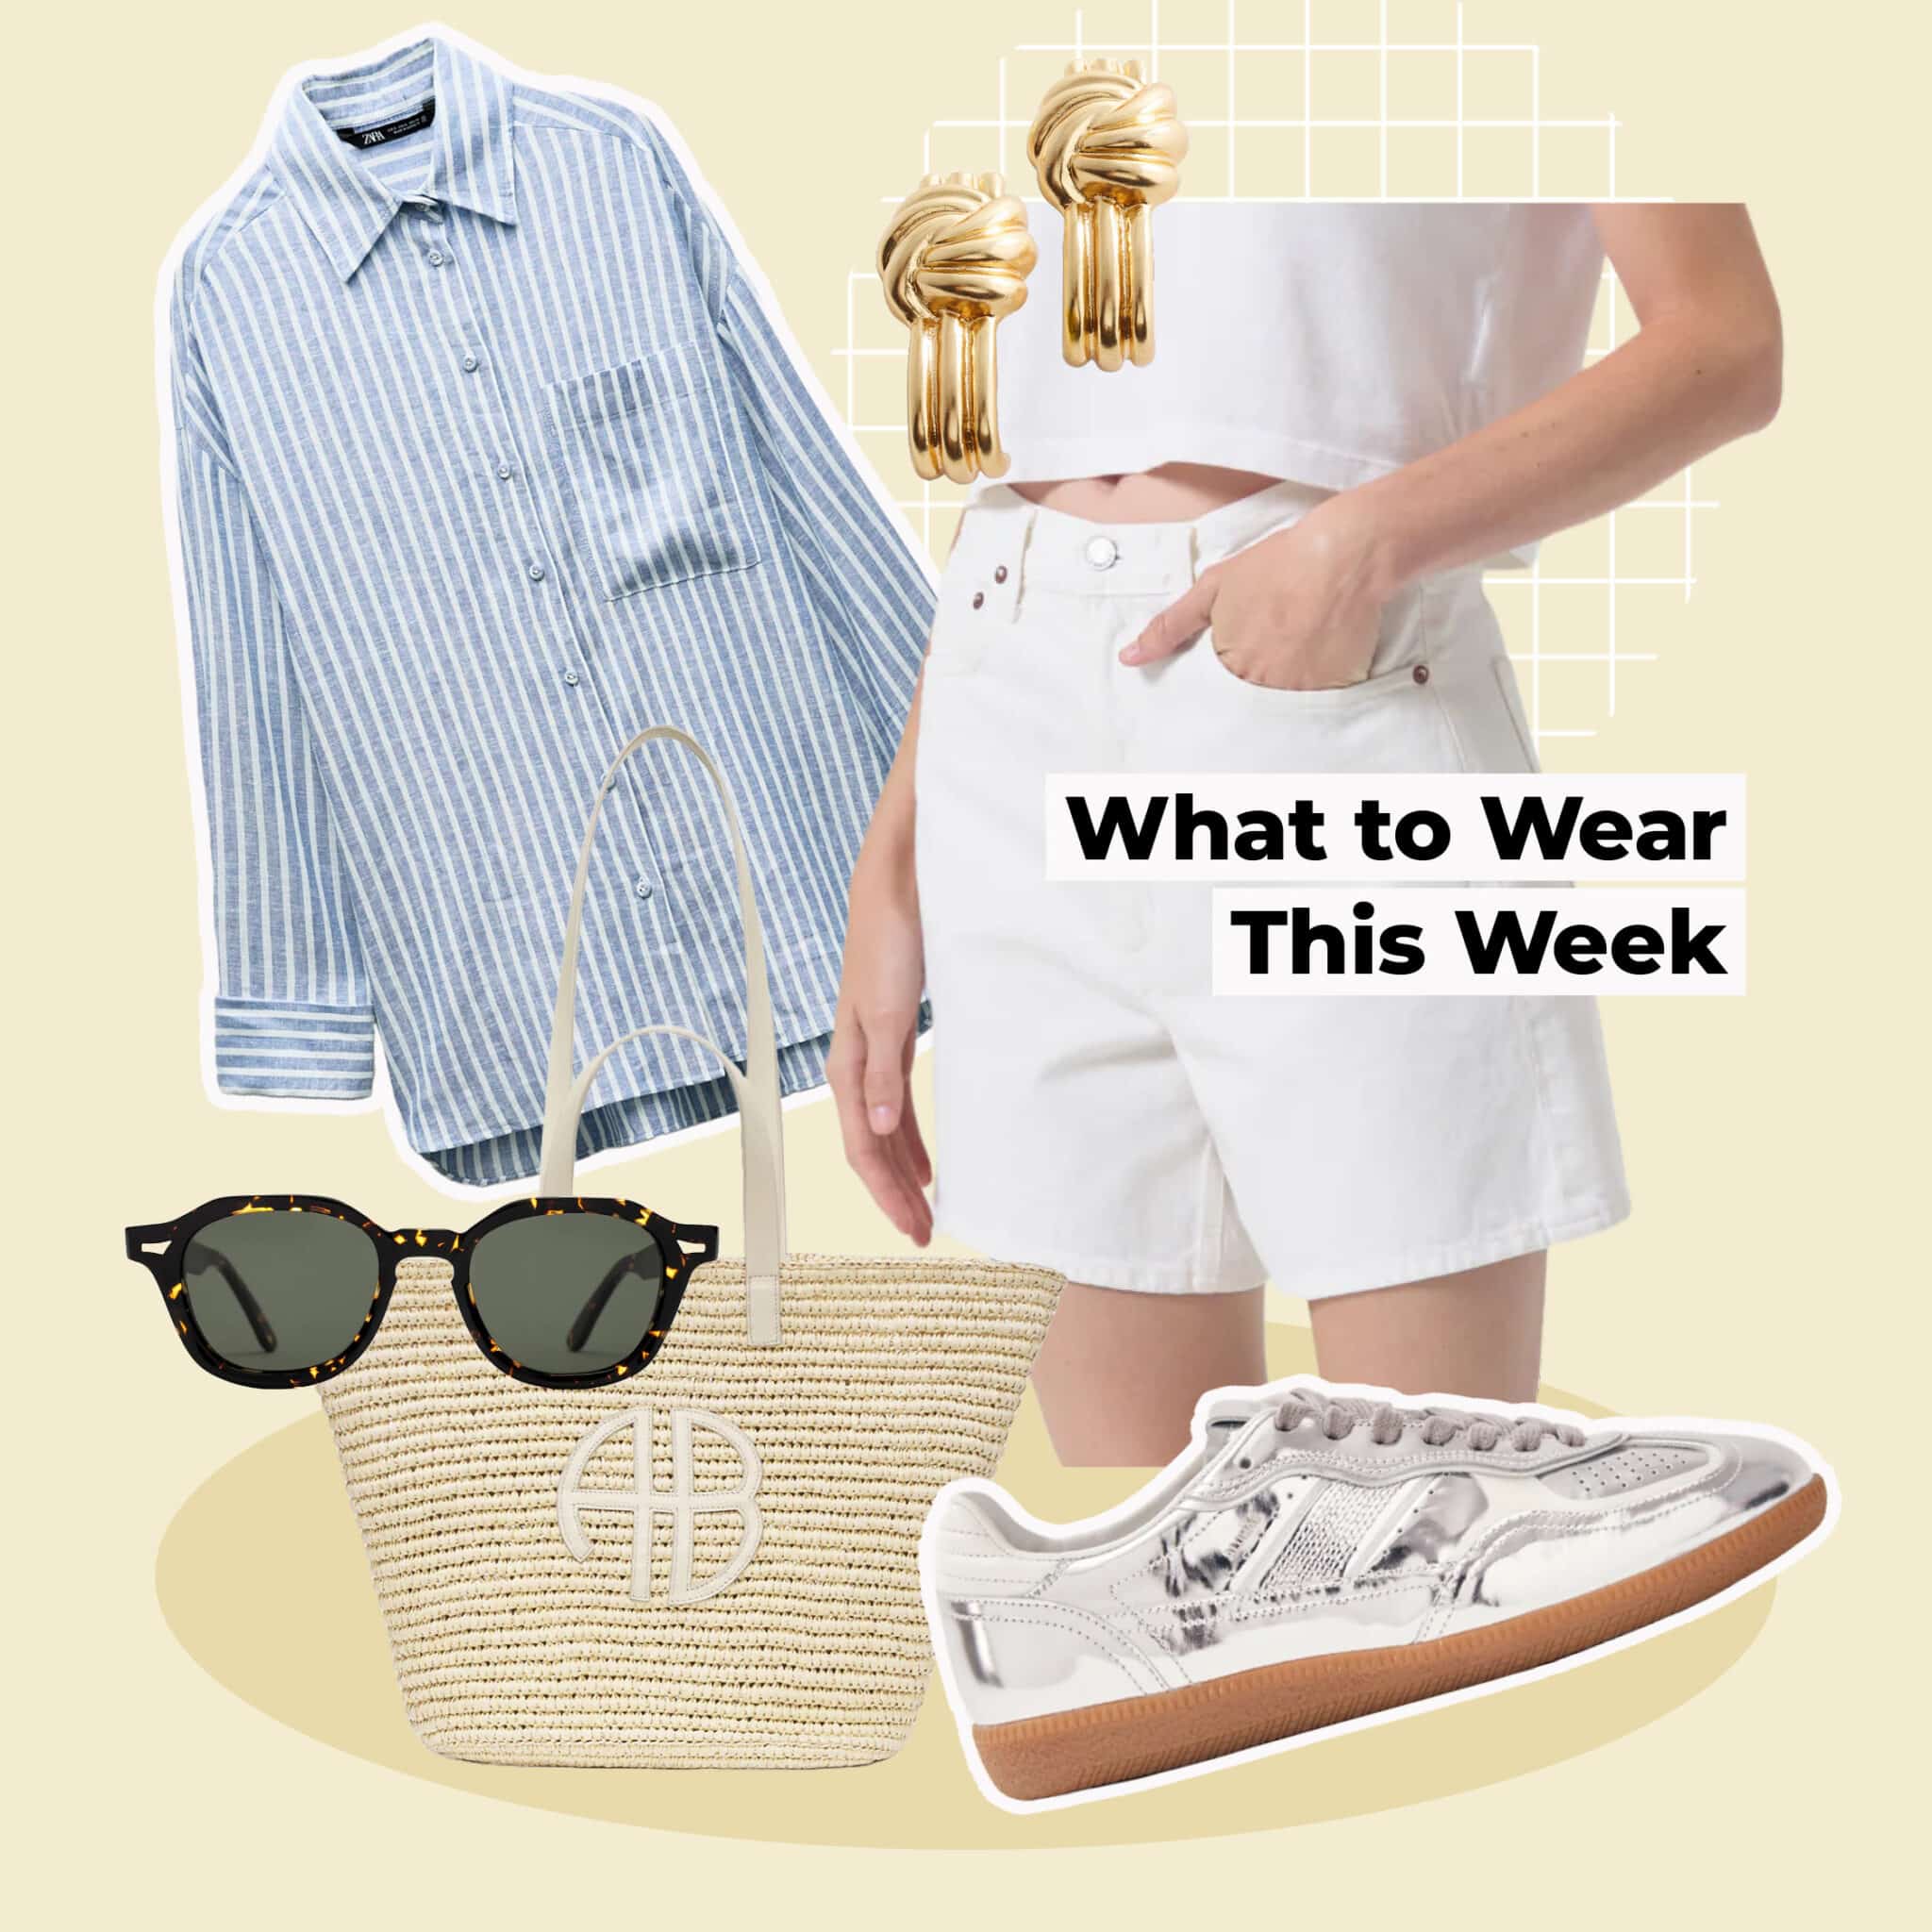 What to Wear This Week